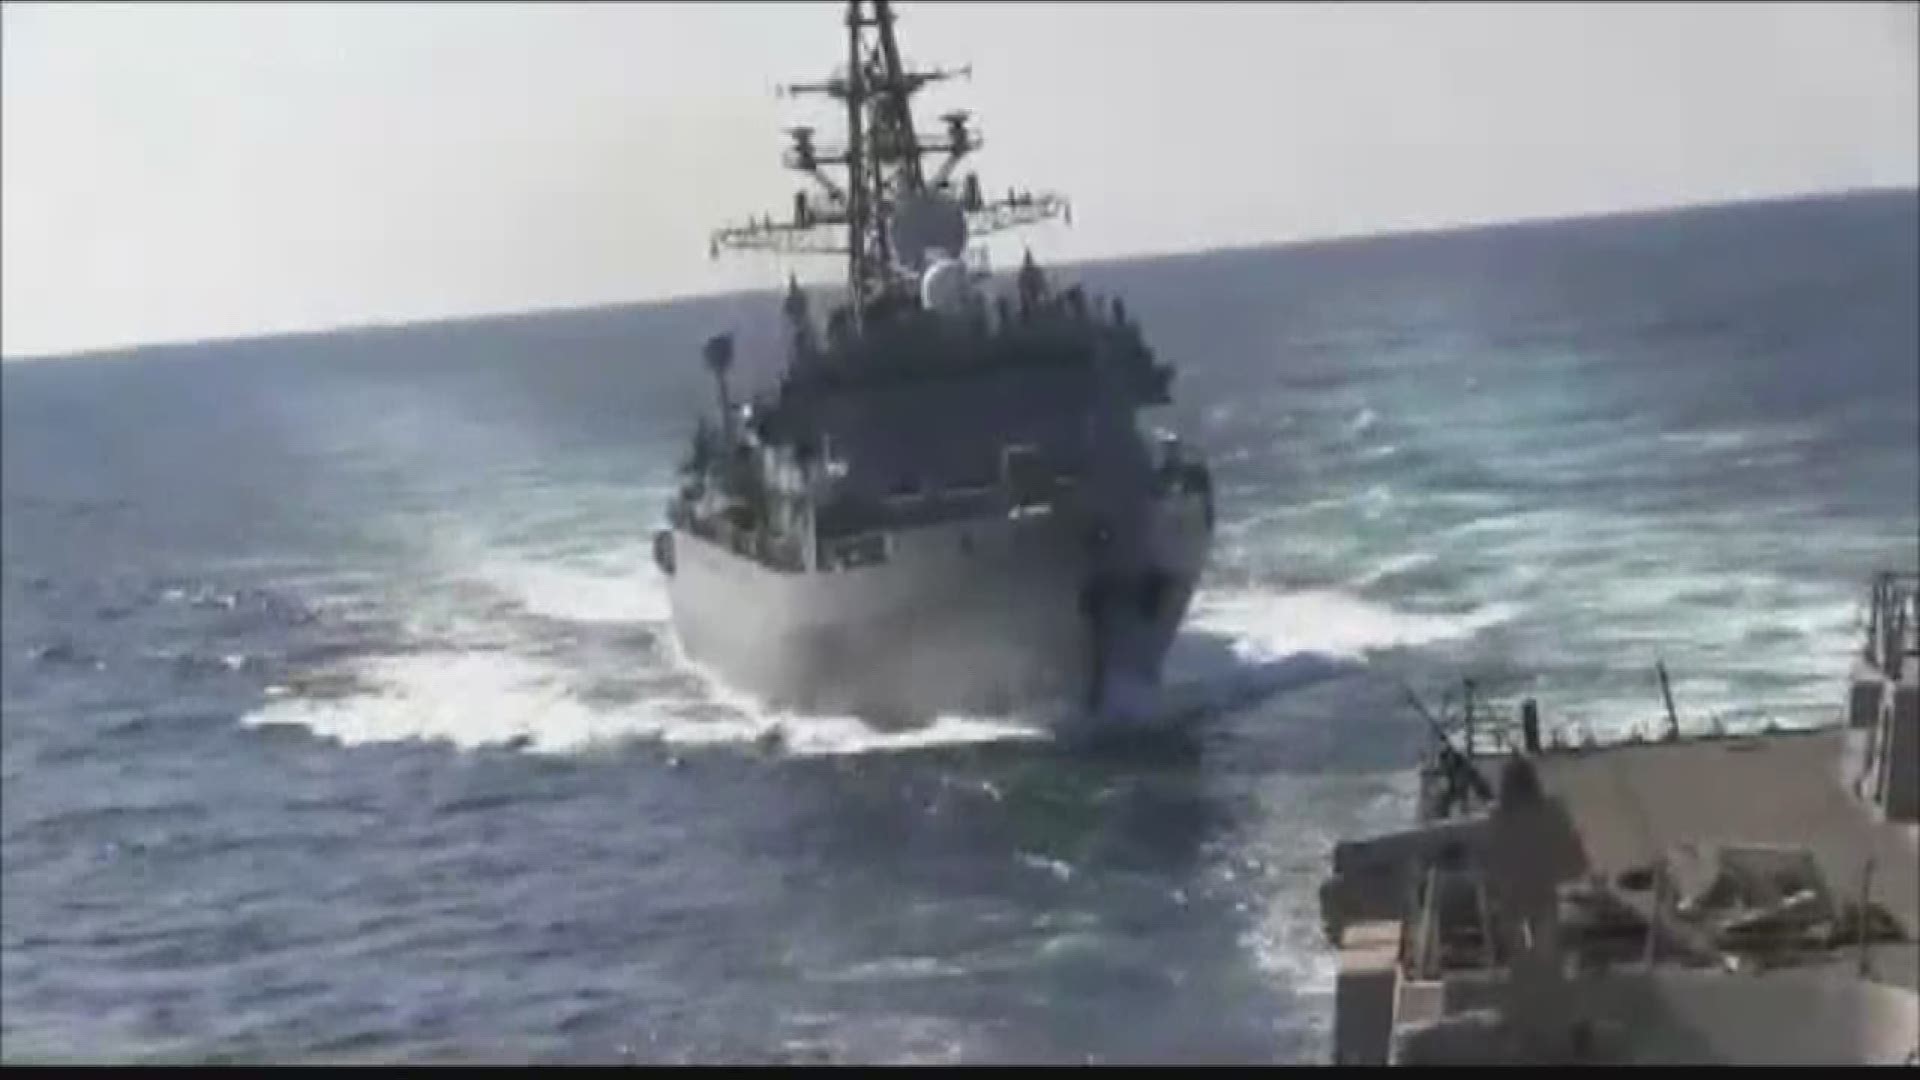 On Friday, the U.S. 5th Fleet posted videos to Twitter detailing the incident which occurred while the USS Farragut (DDG 99) was conducting routine operations.